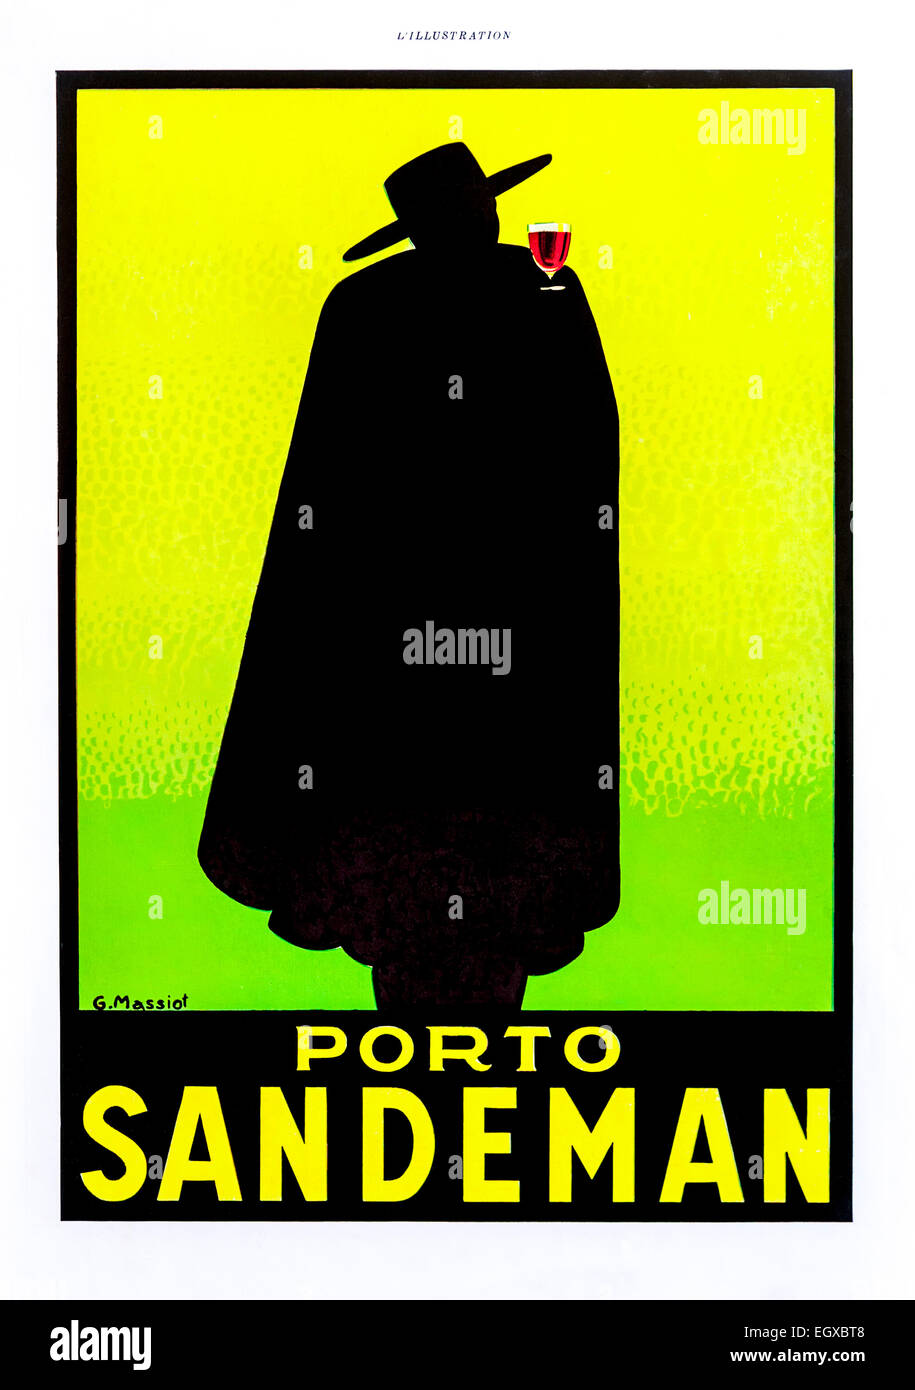 1930s advert for “Sandeman” Port drink from French “L’Illustration” magazine. Stock Photo